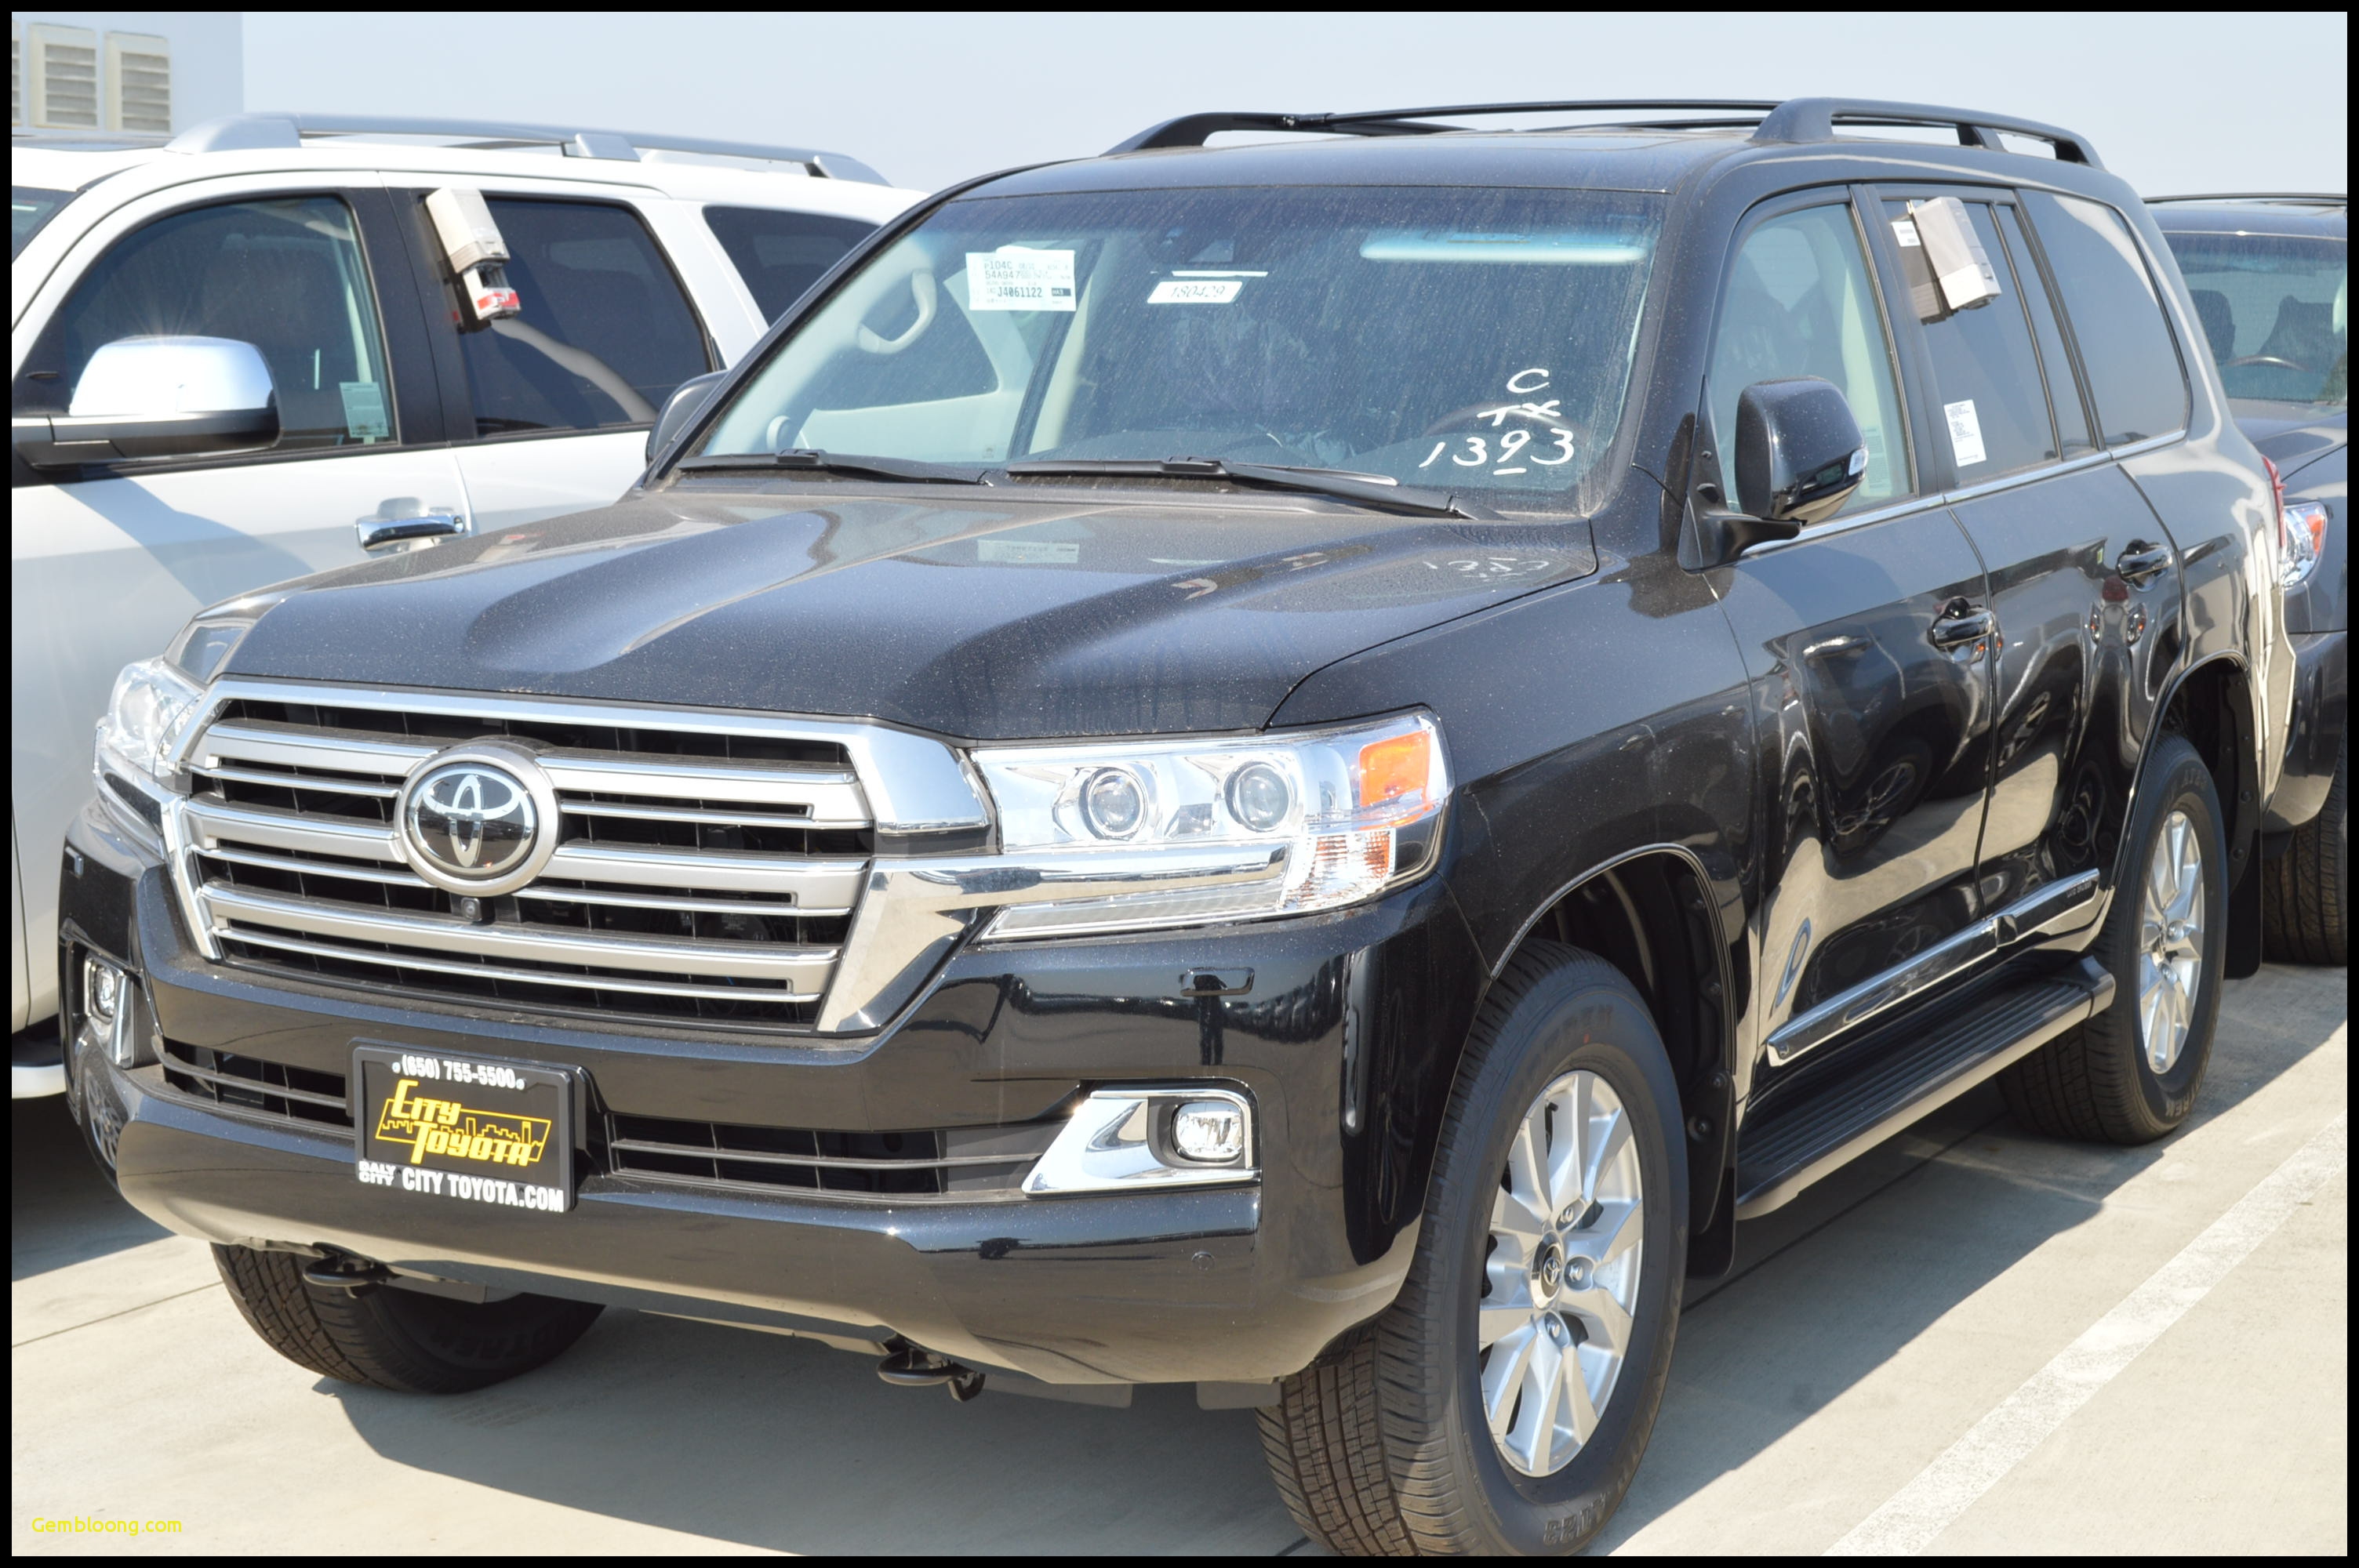 Hot 2018 Land Cruiser 2018 Land Cruiser Safety Connect New New 2018 Specs and Review